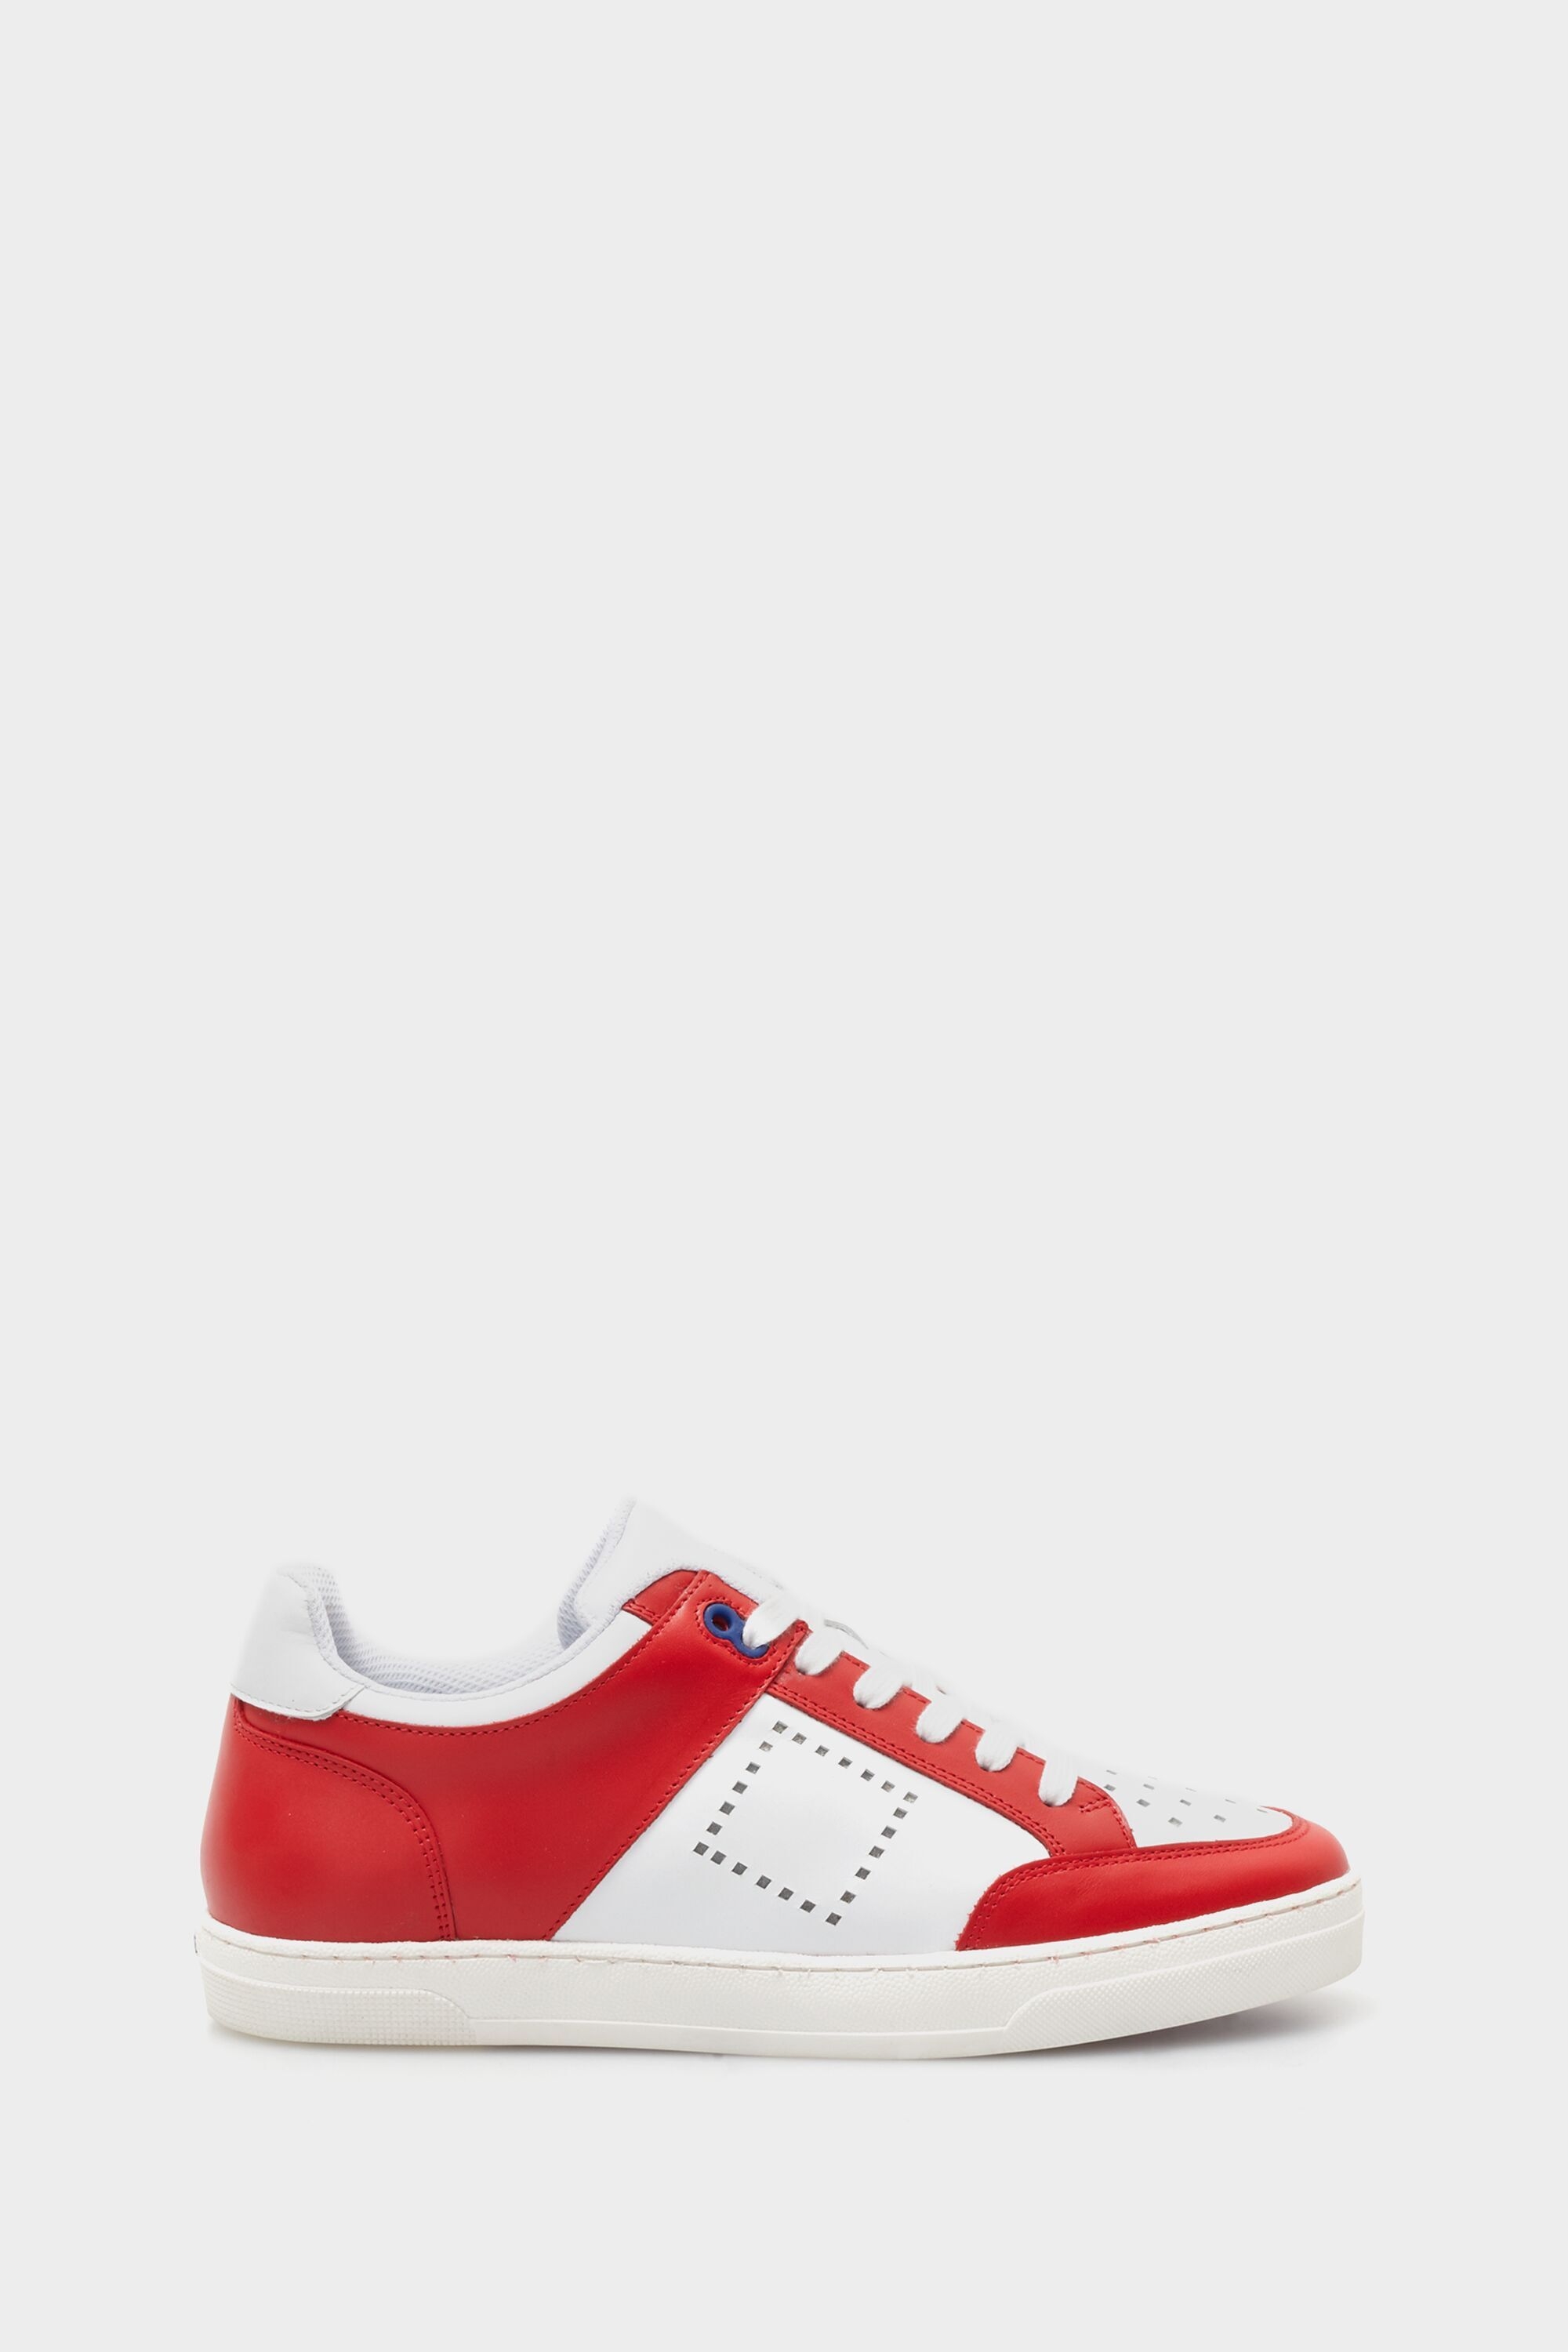 Cube perforated leather sneakers